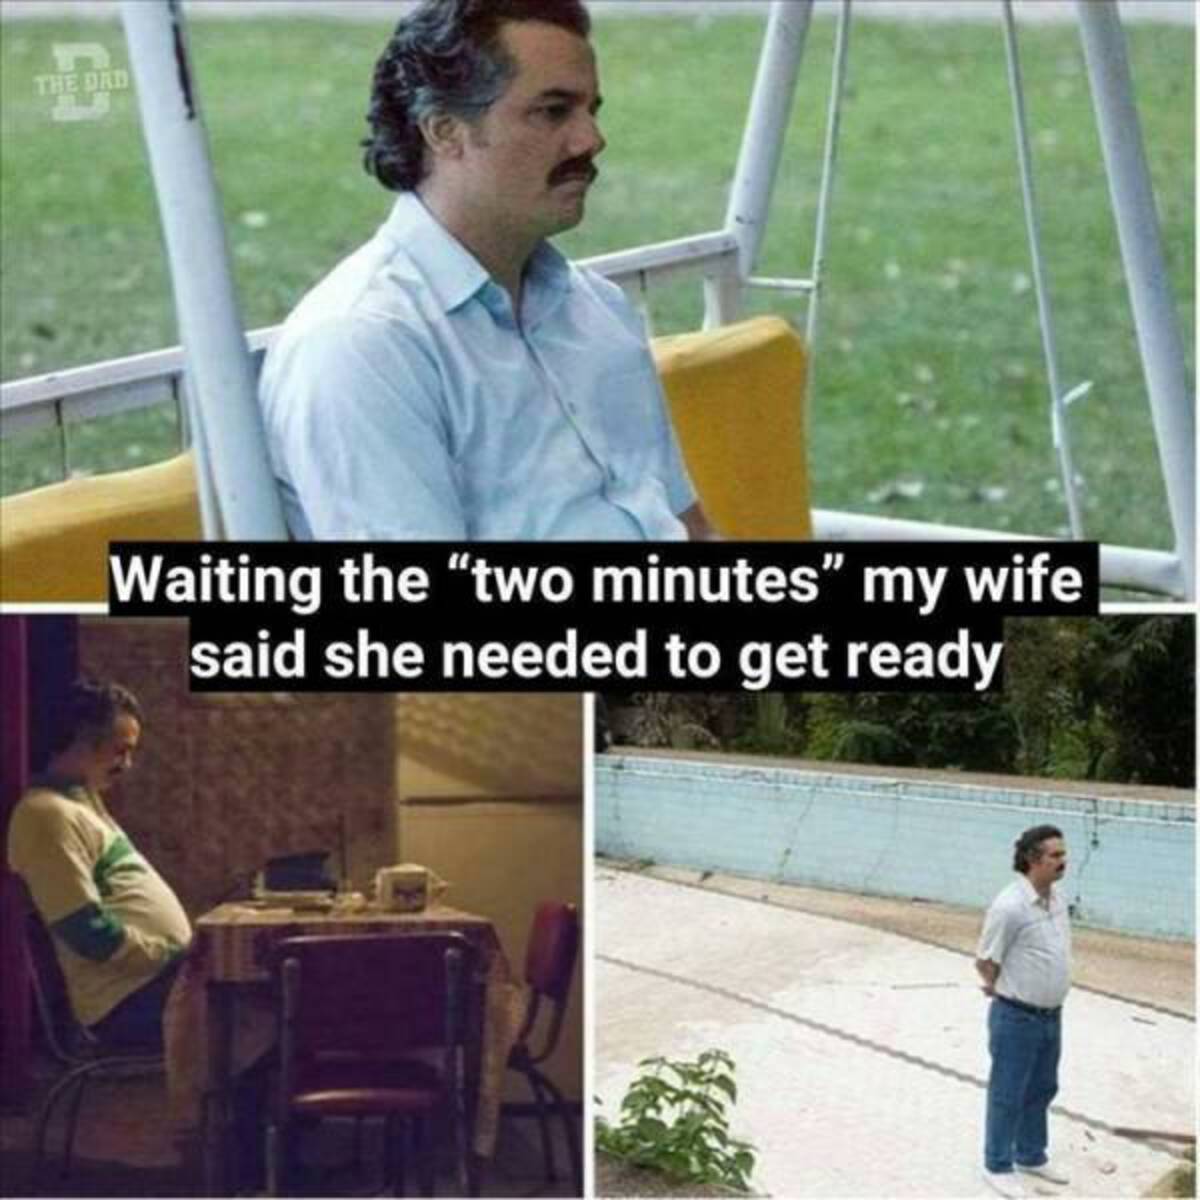 man standing by window meme - The Dad Waiting the "two minutes" my wife said she needed to get ready